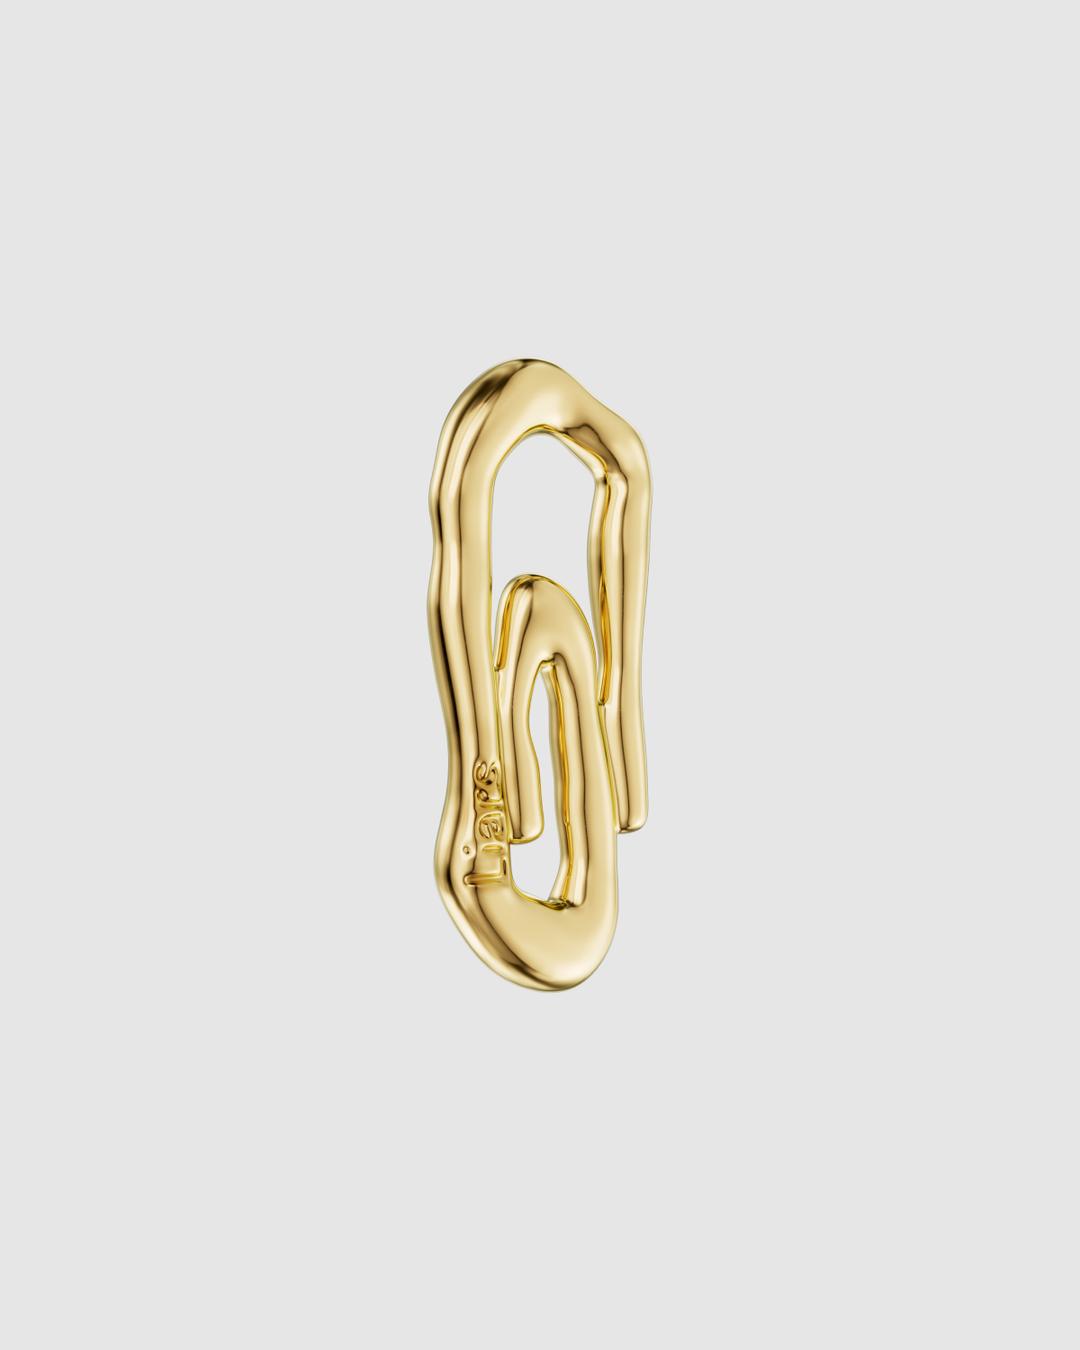 New Nature paper clip trinket with gold plating